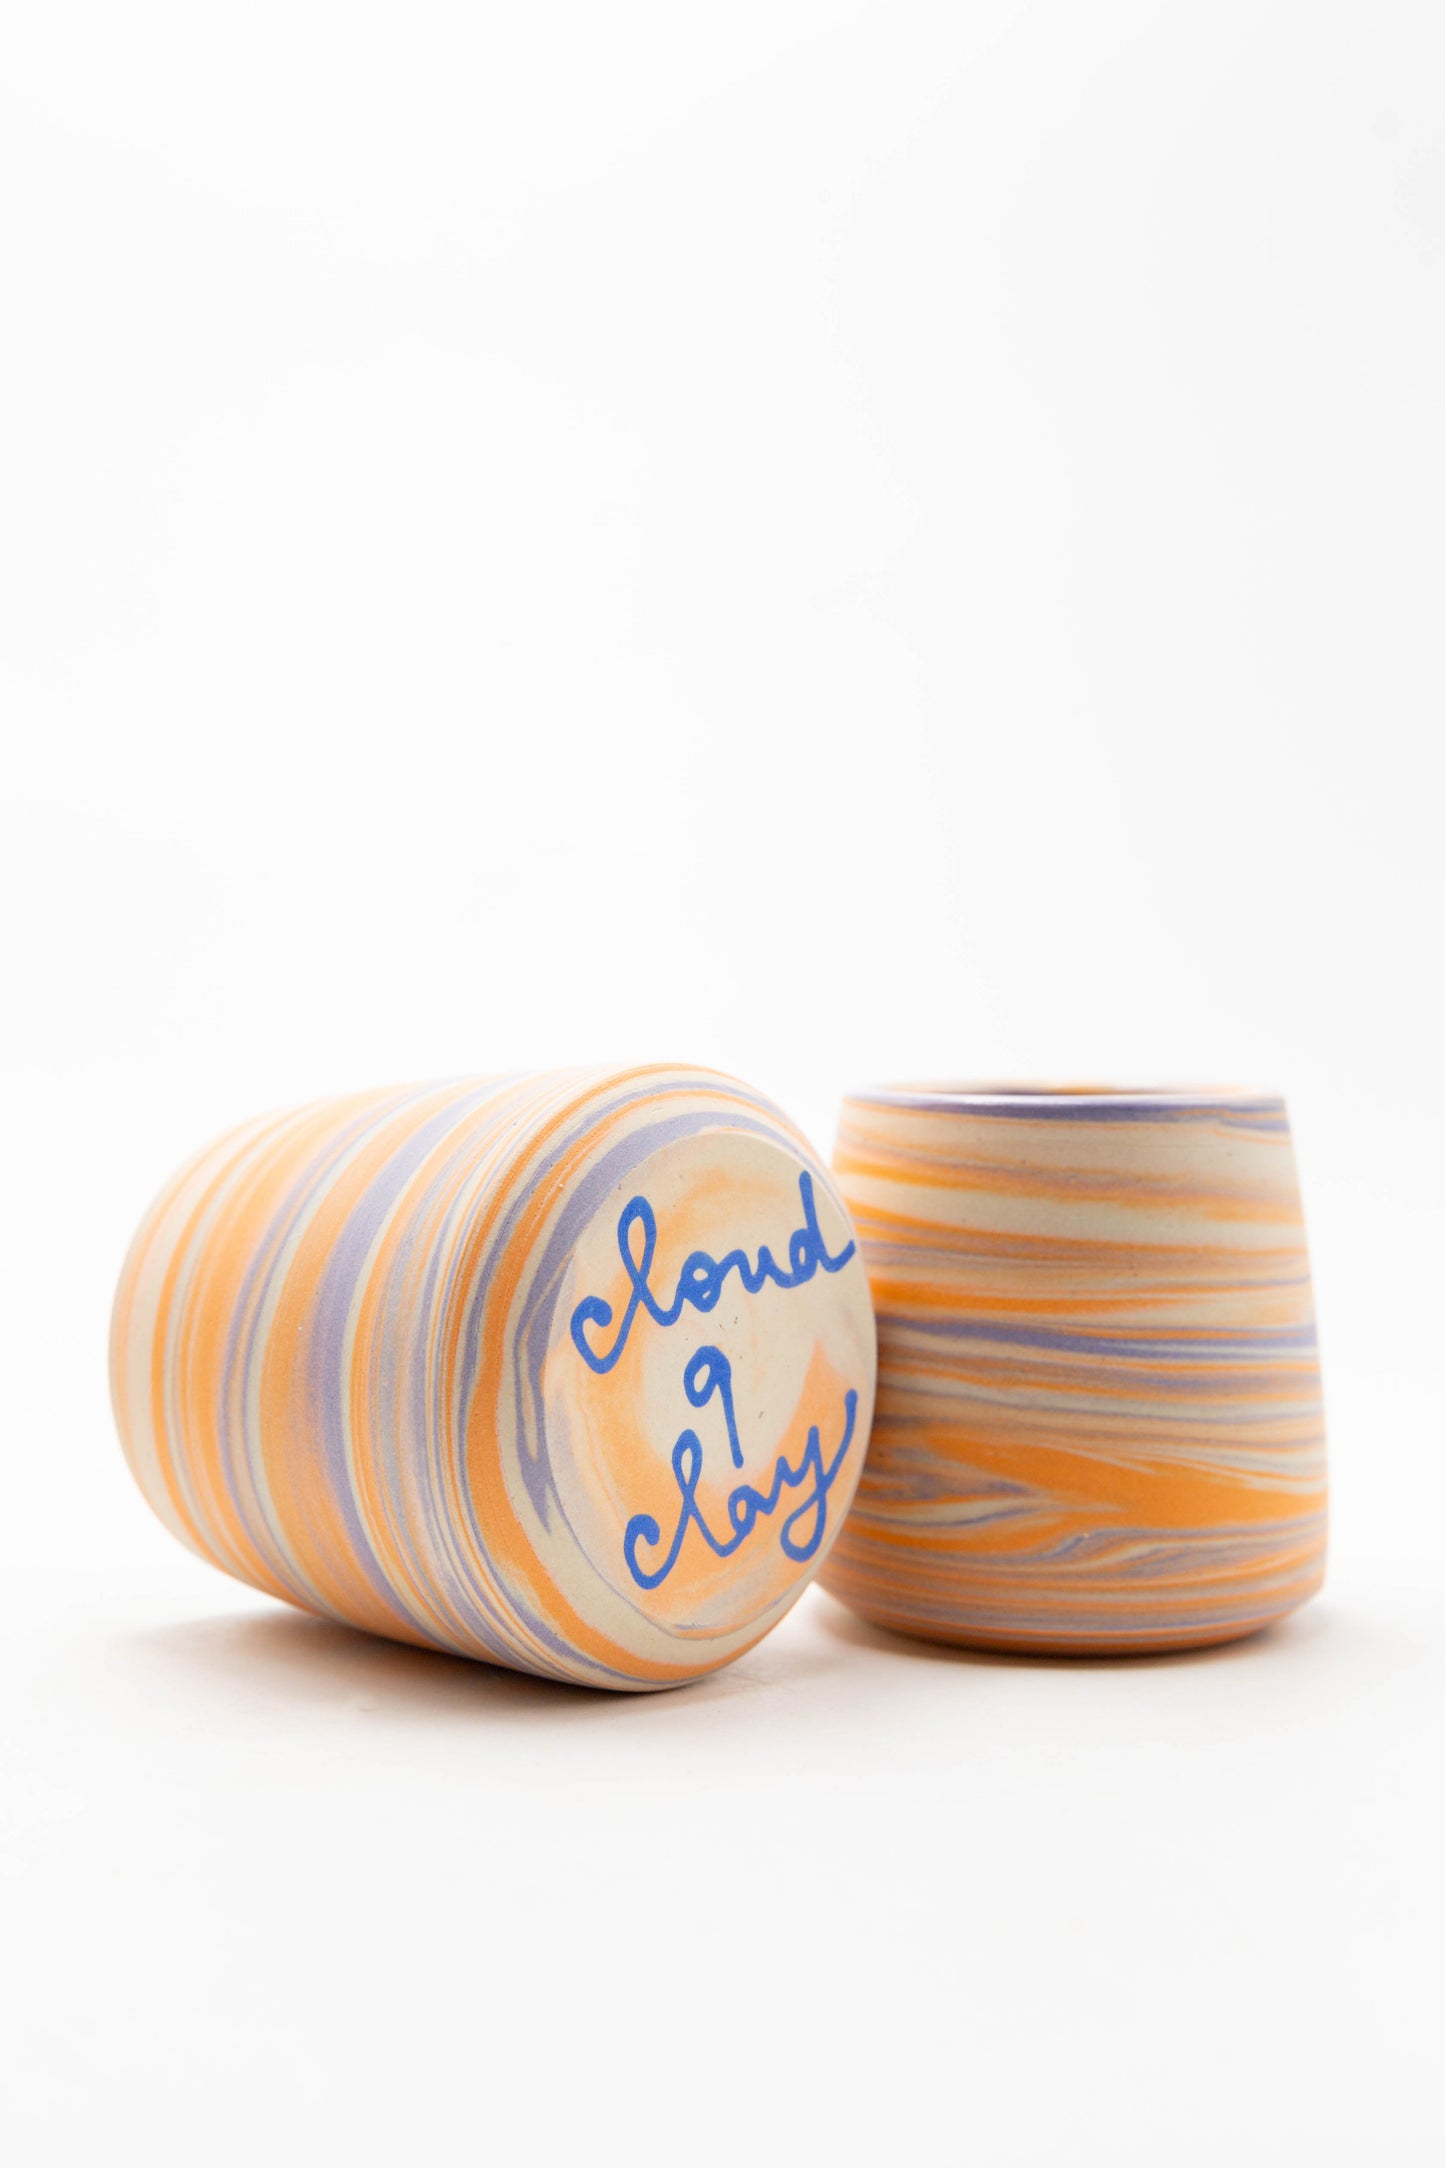 Marbled Espresso Cup 005